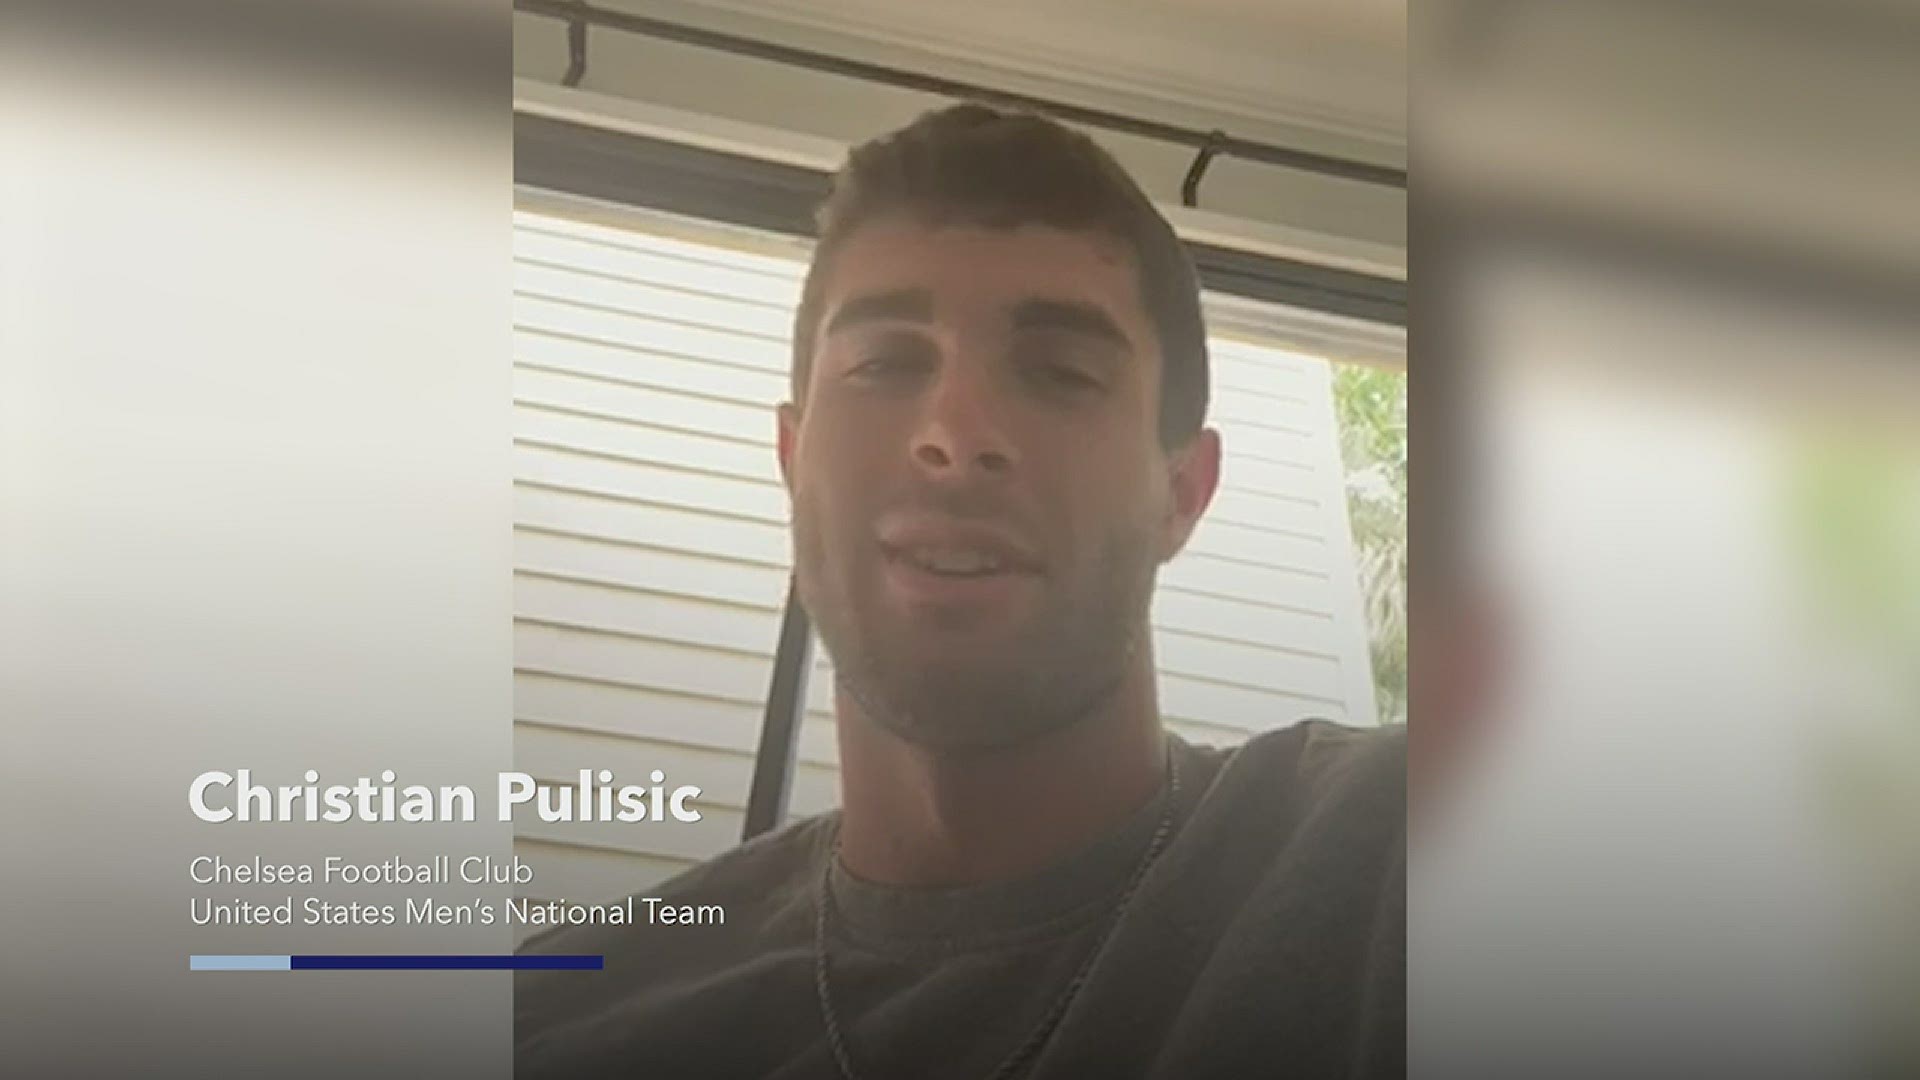 Soccer star and Hershey native Christian Pulisic donated food from Chipotle to thank the staff for their "strength and bravery."